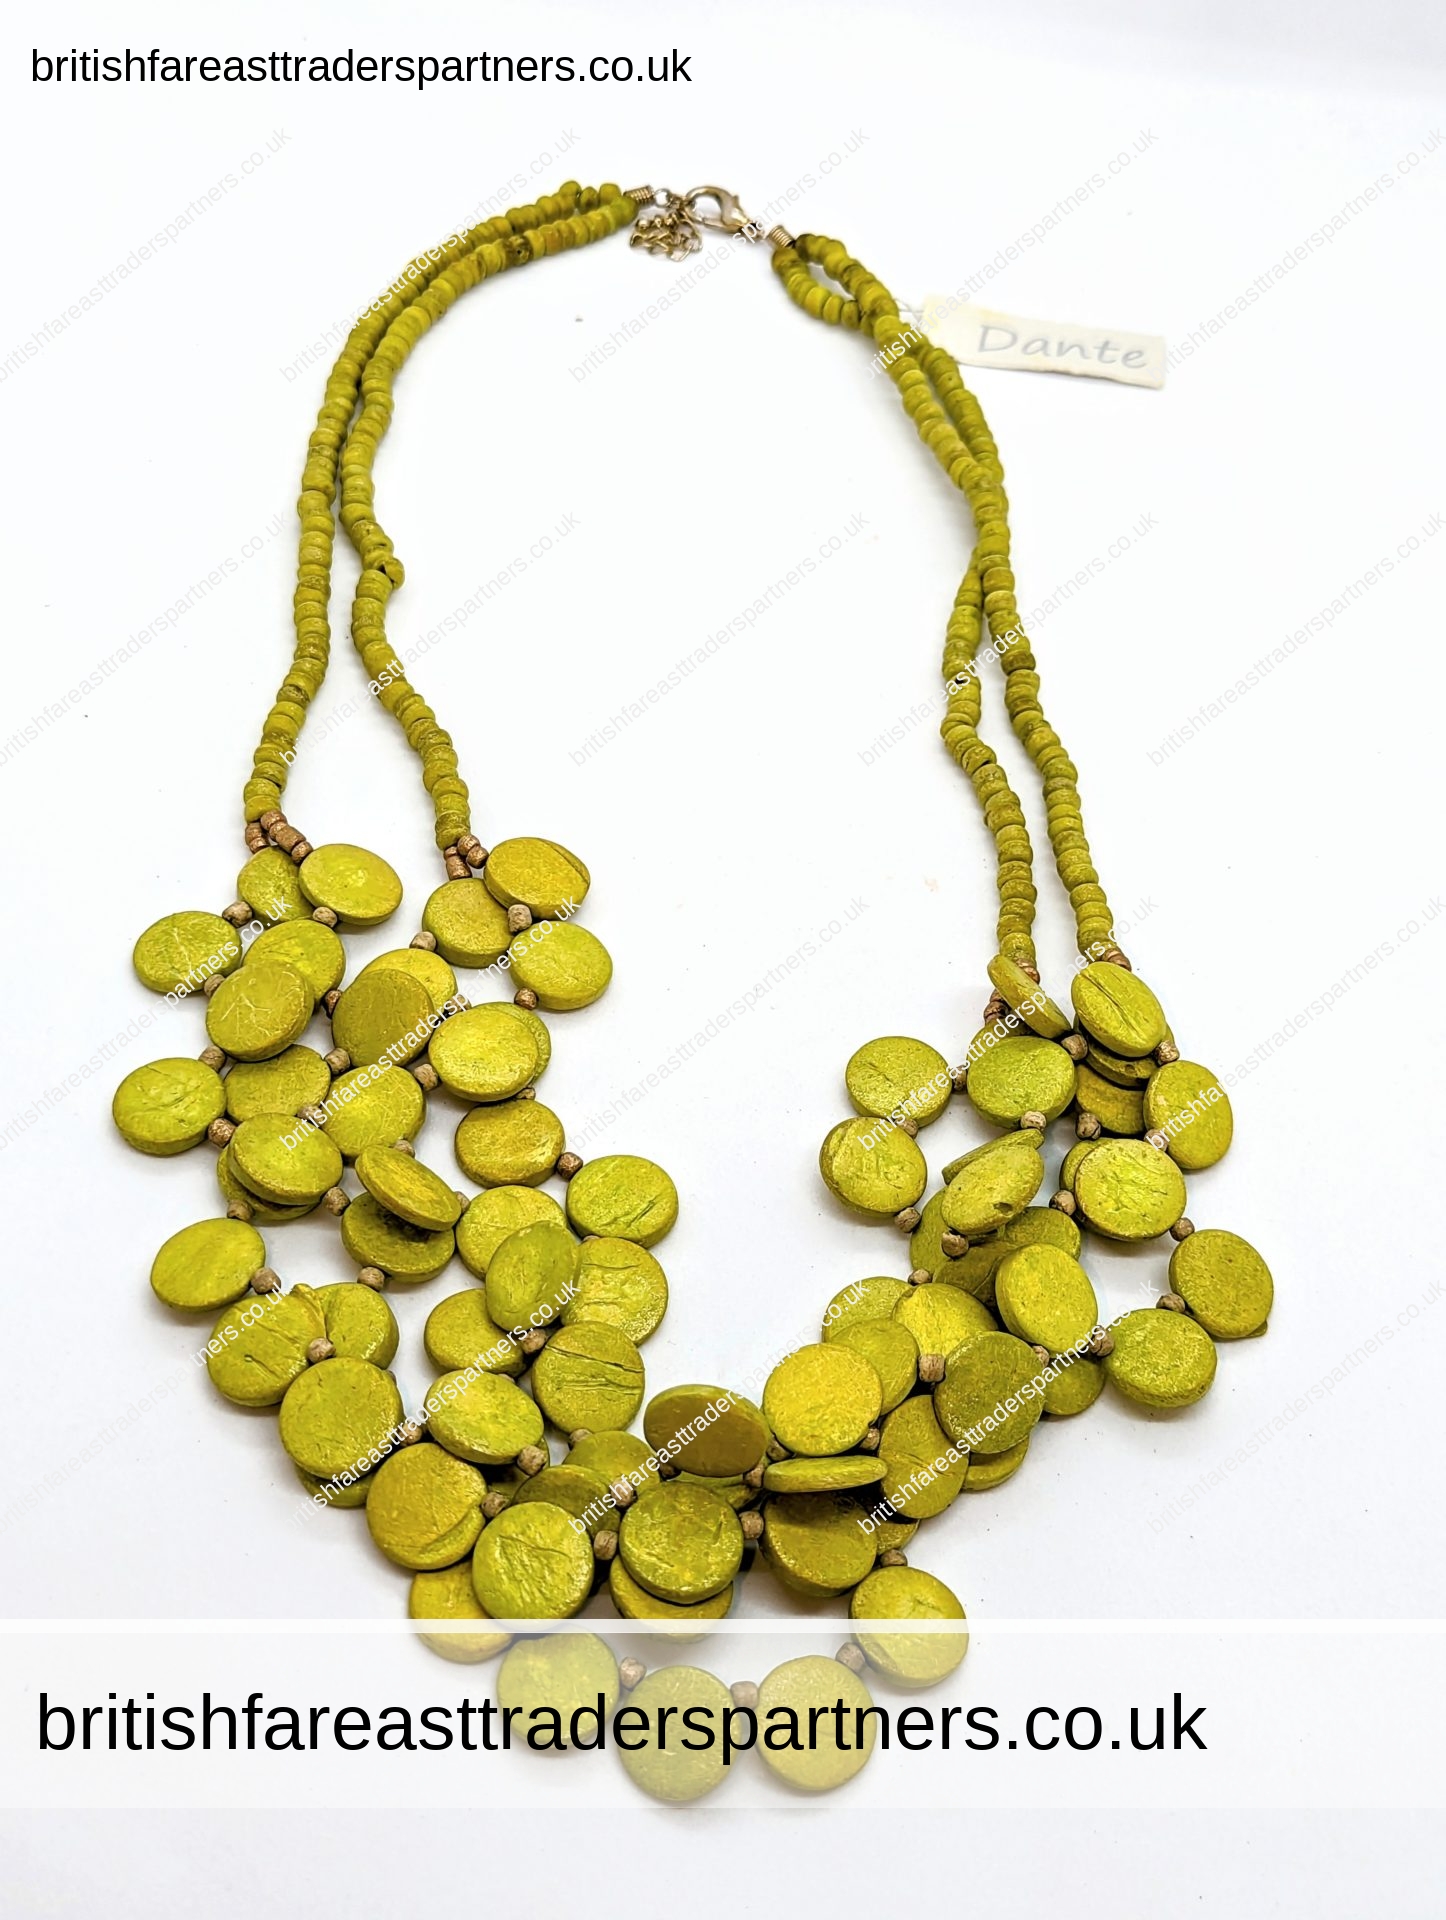 Double-Stranded Acid / Lime GREEN Wood Beads & Buttons ETHNIC BOHEMIAN Necklace